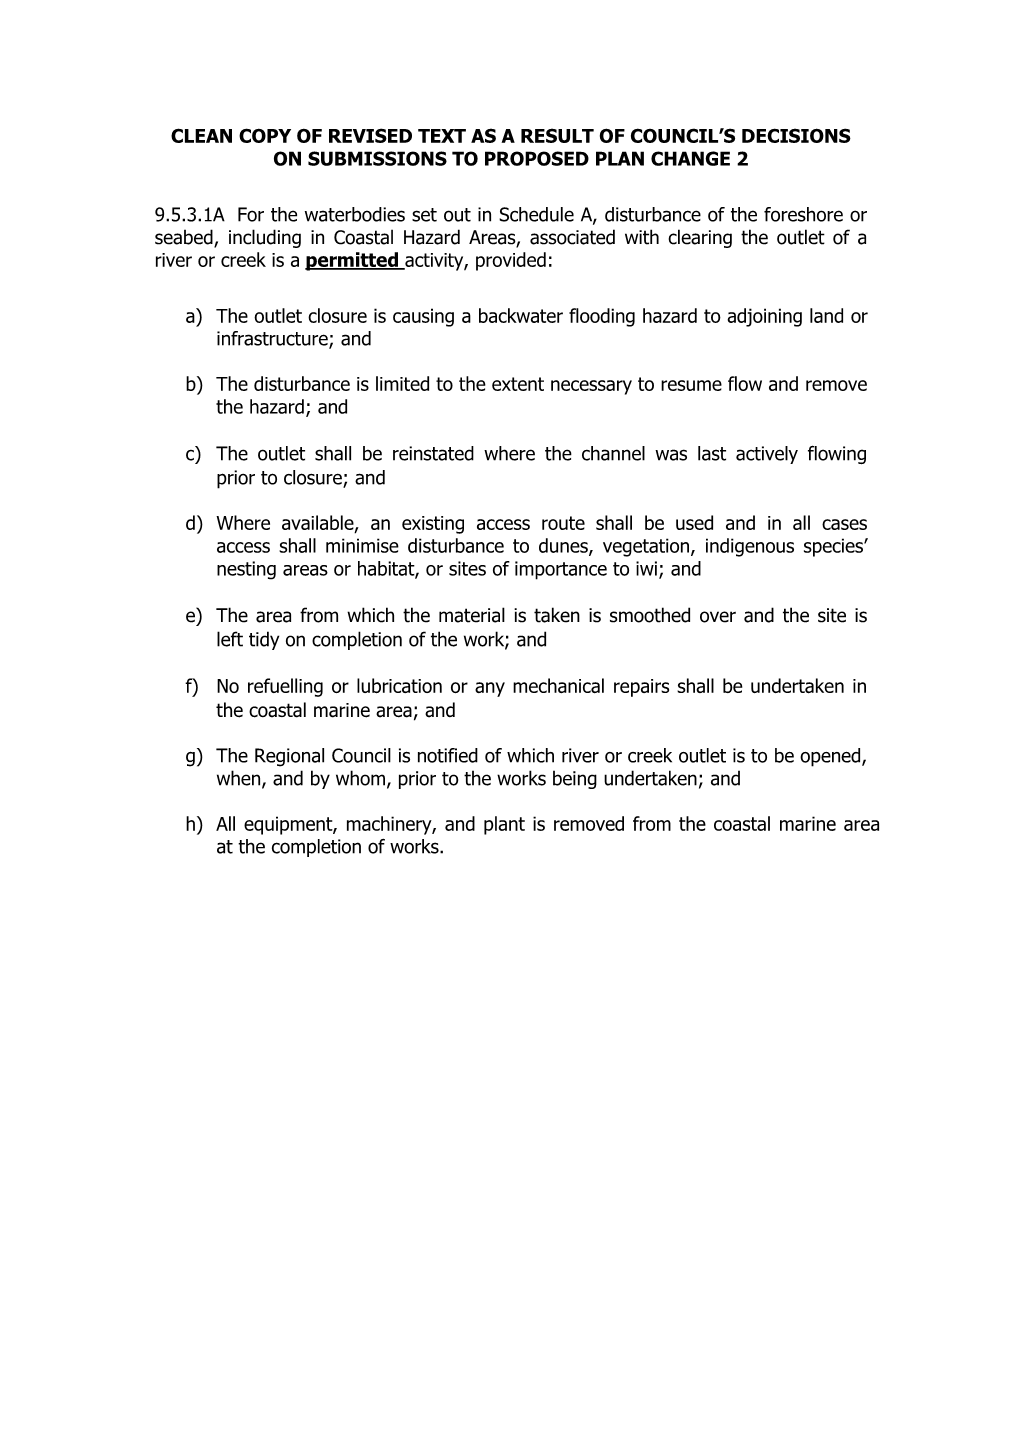 Clean Copy of Revised Text As a Result of Council’S Decisions on Submissions to Proposed Plan Change 2